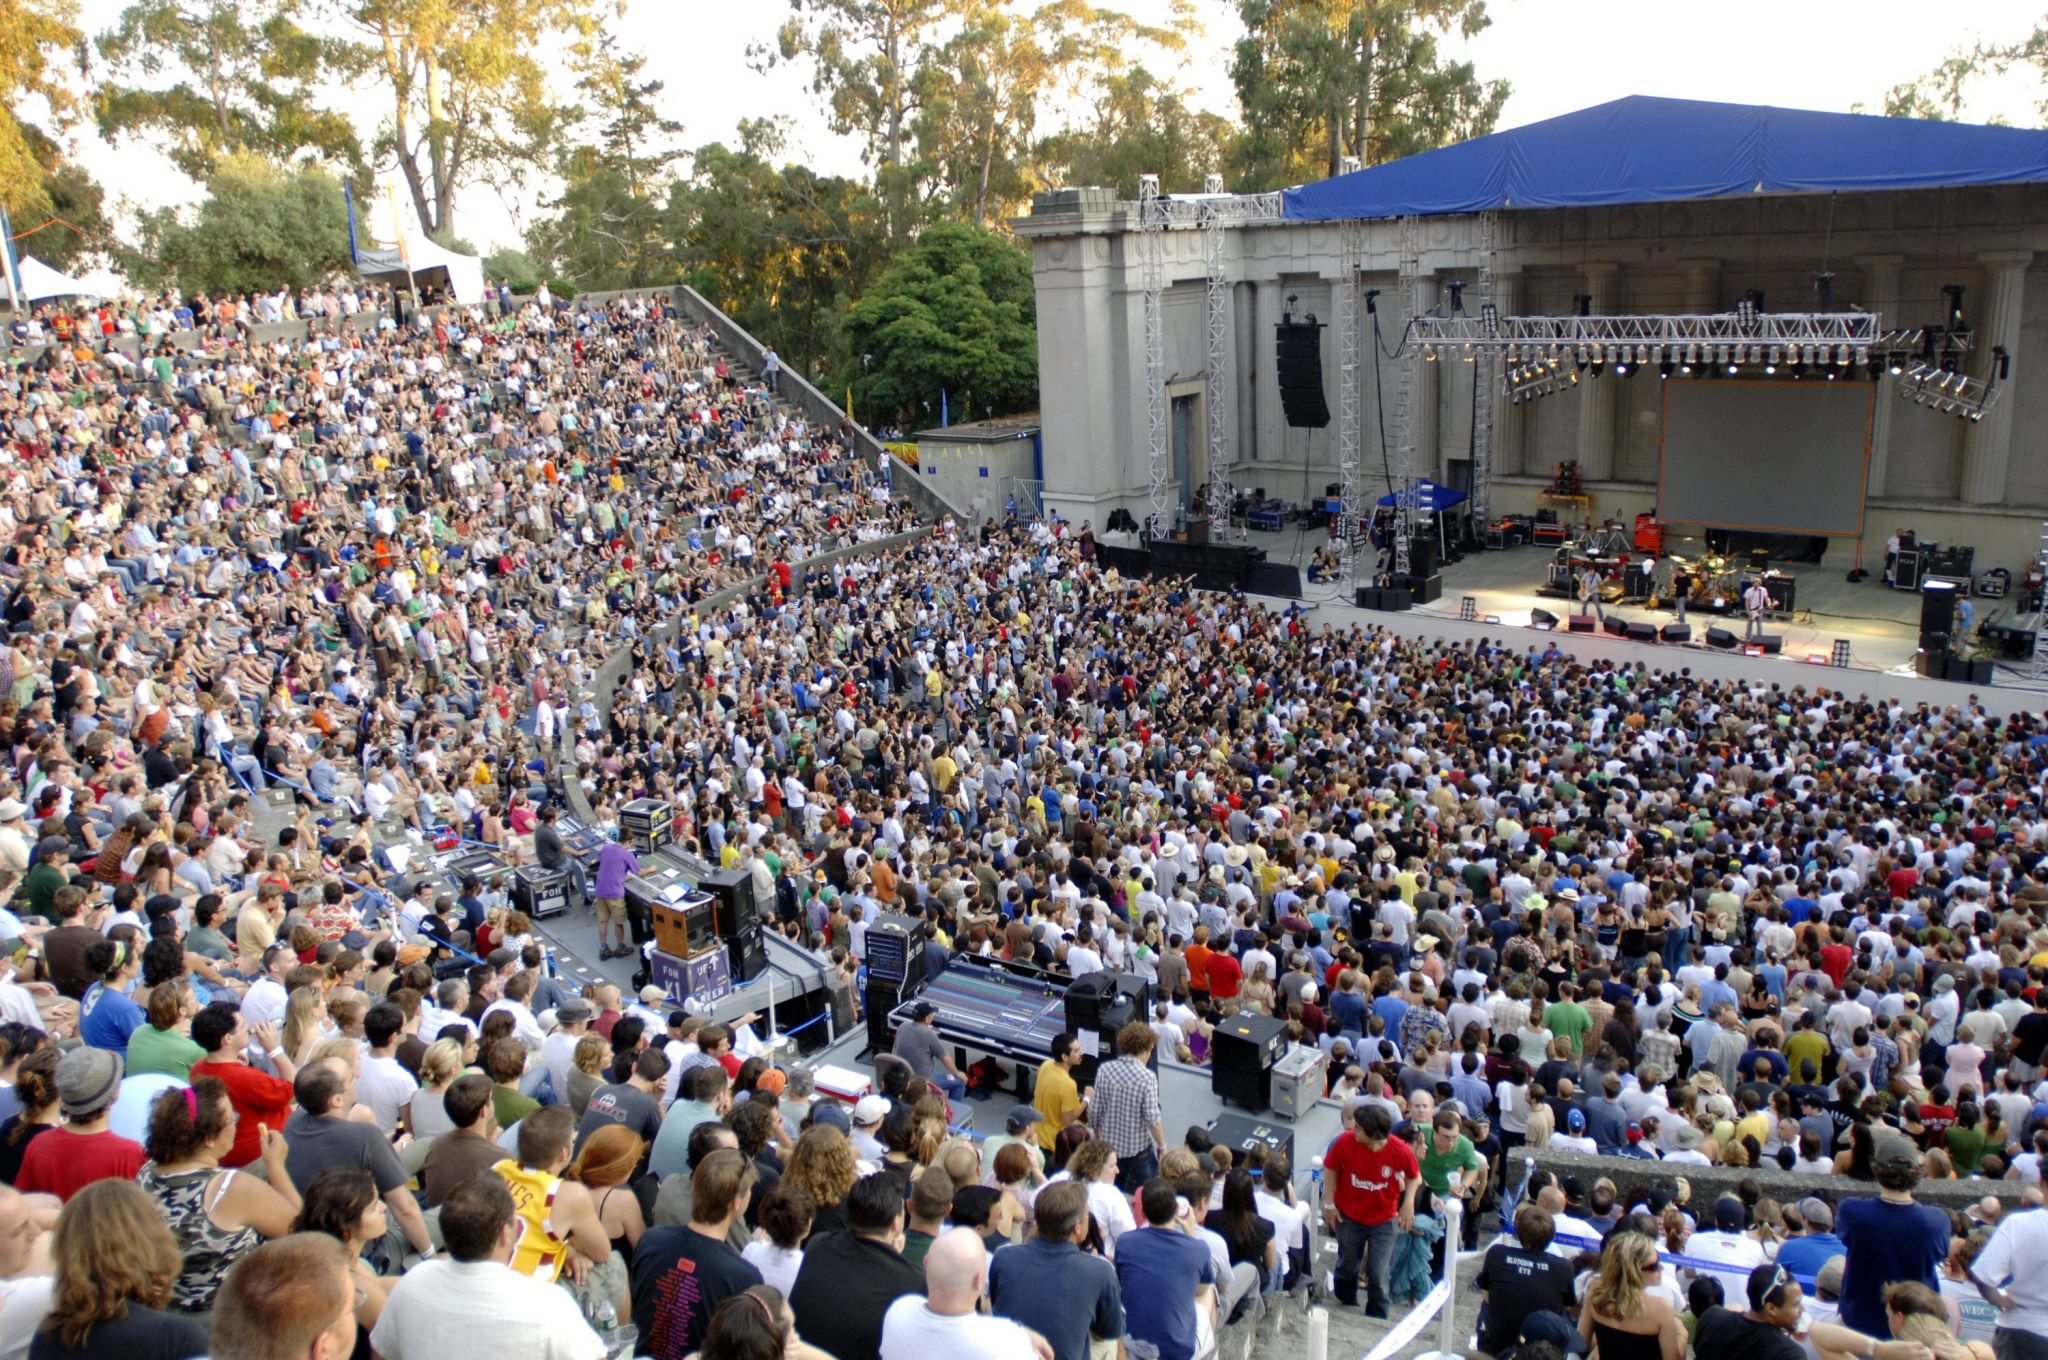 The Greek Theatre started with one mysterious UC Berkeley student